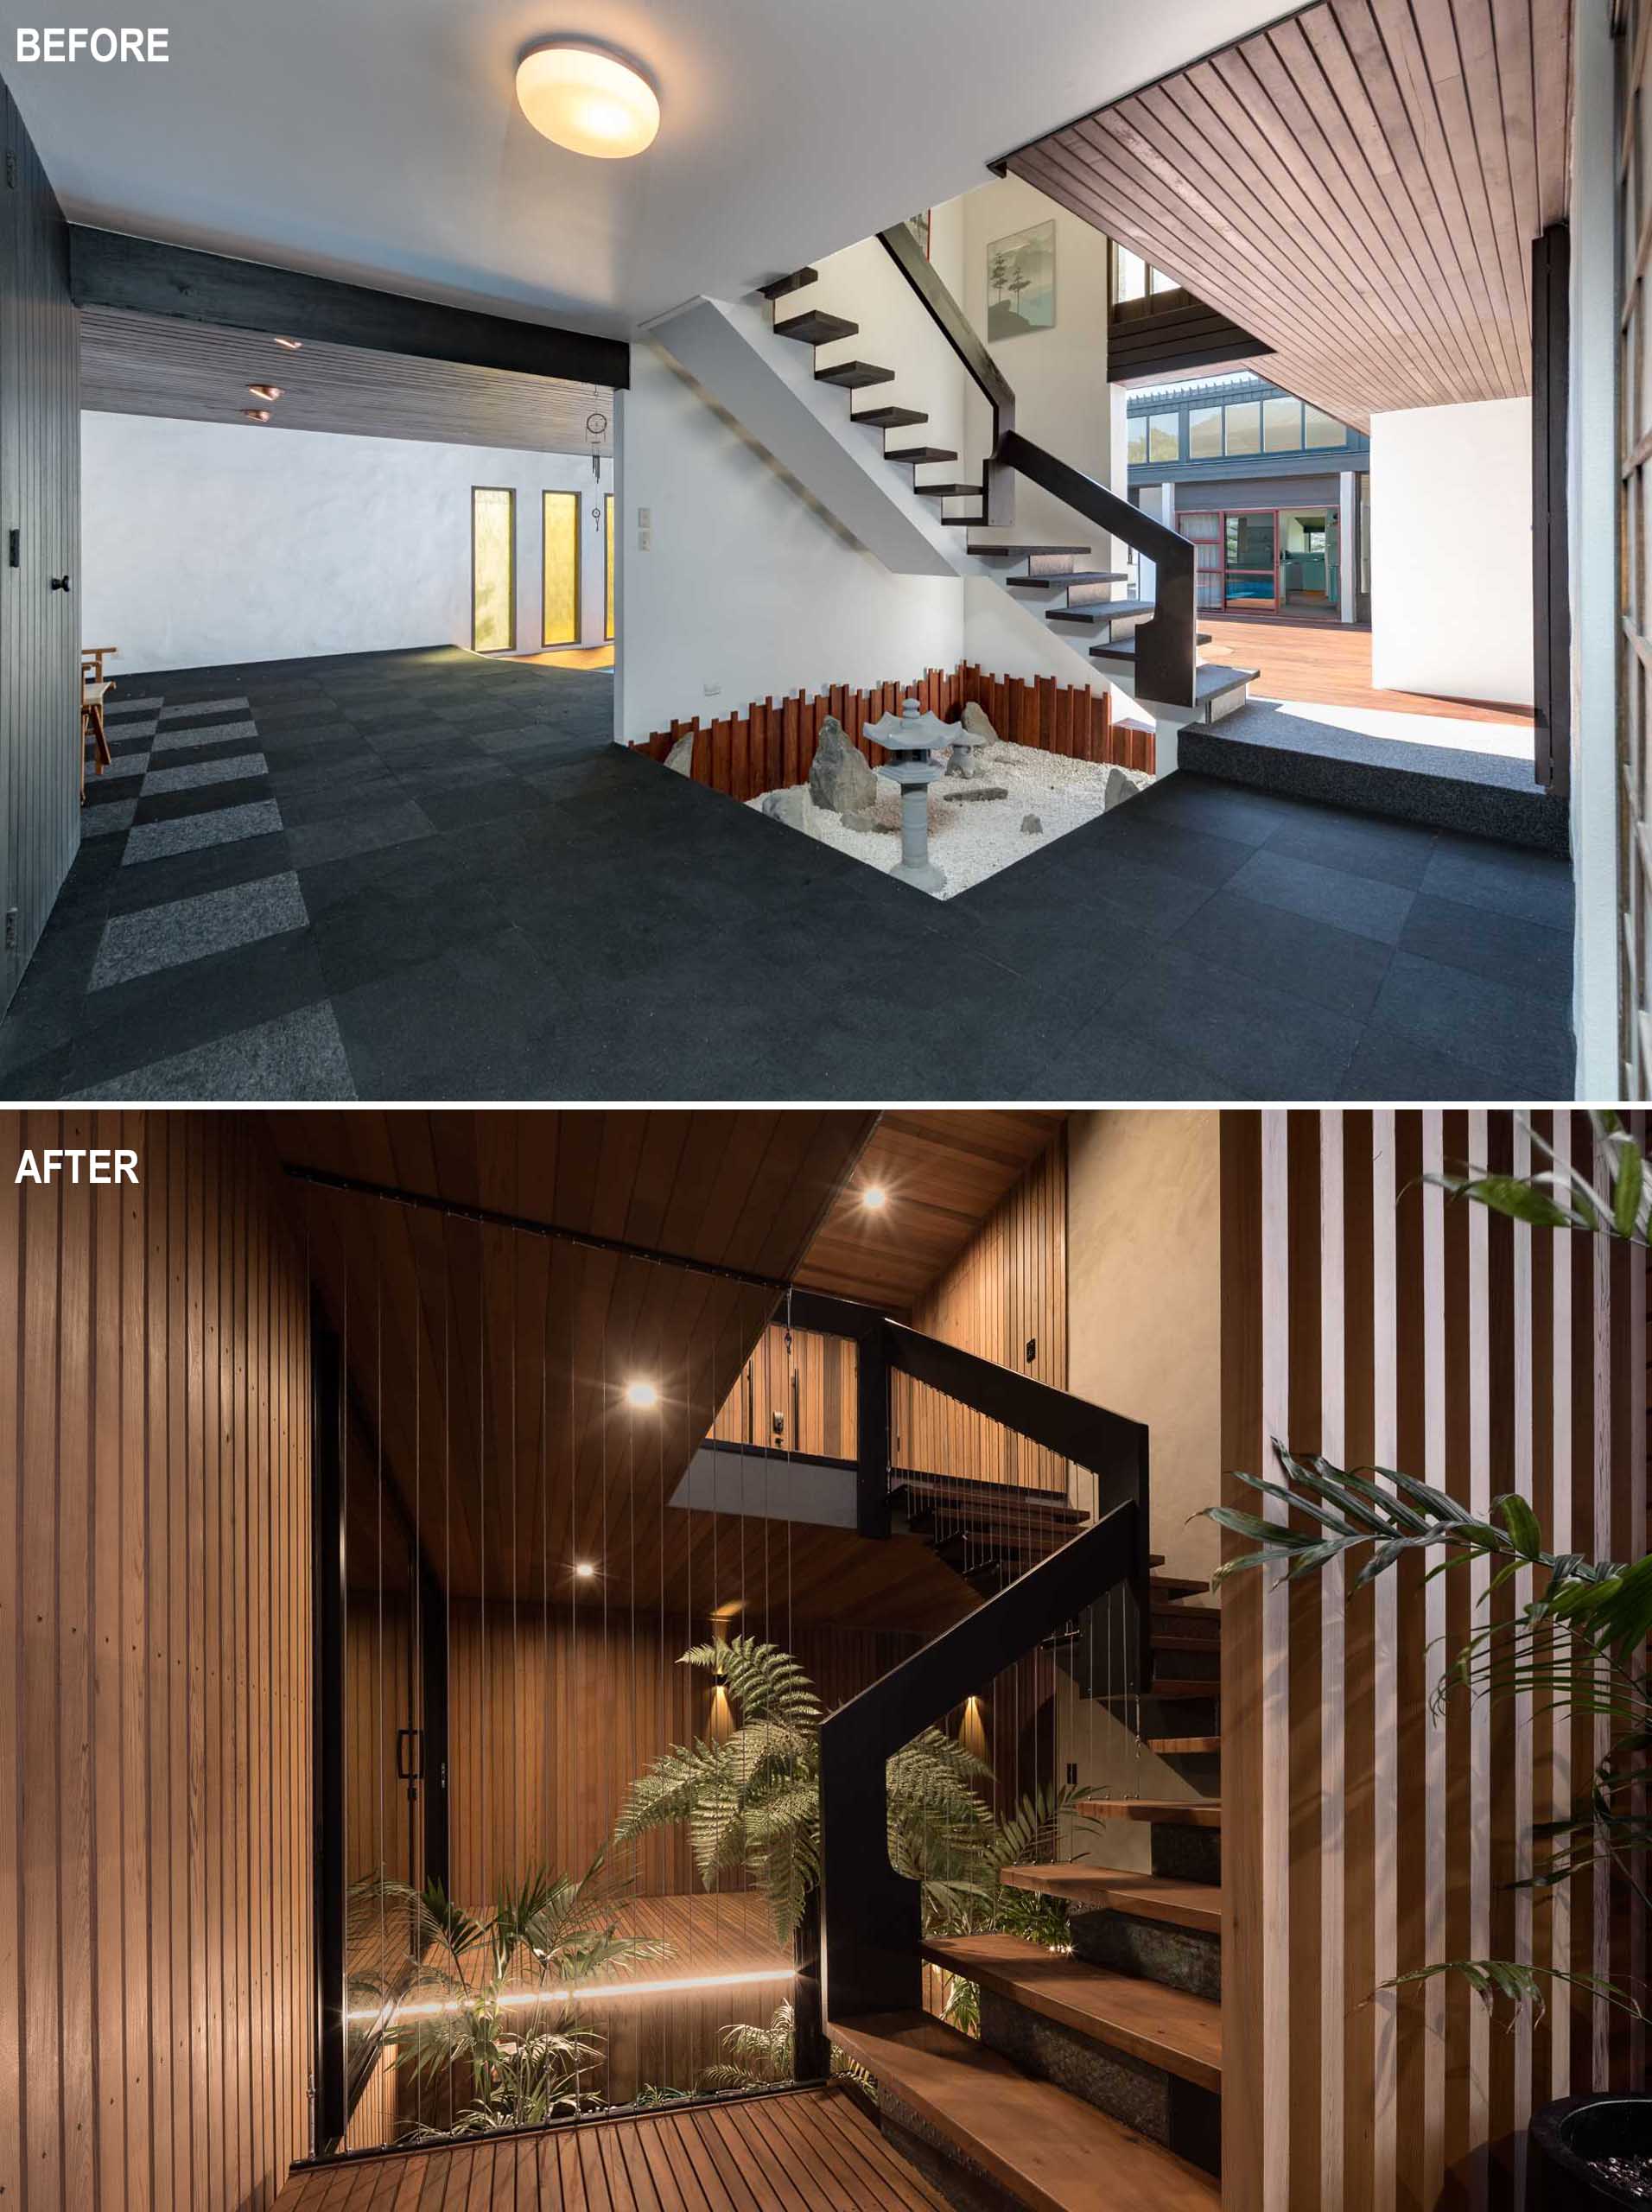 The original black and white stairs were replaced with black and wood stairs, while underneath the stairs is now a small garden.